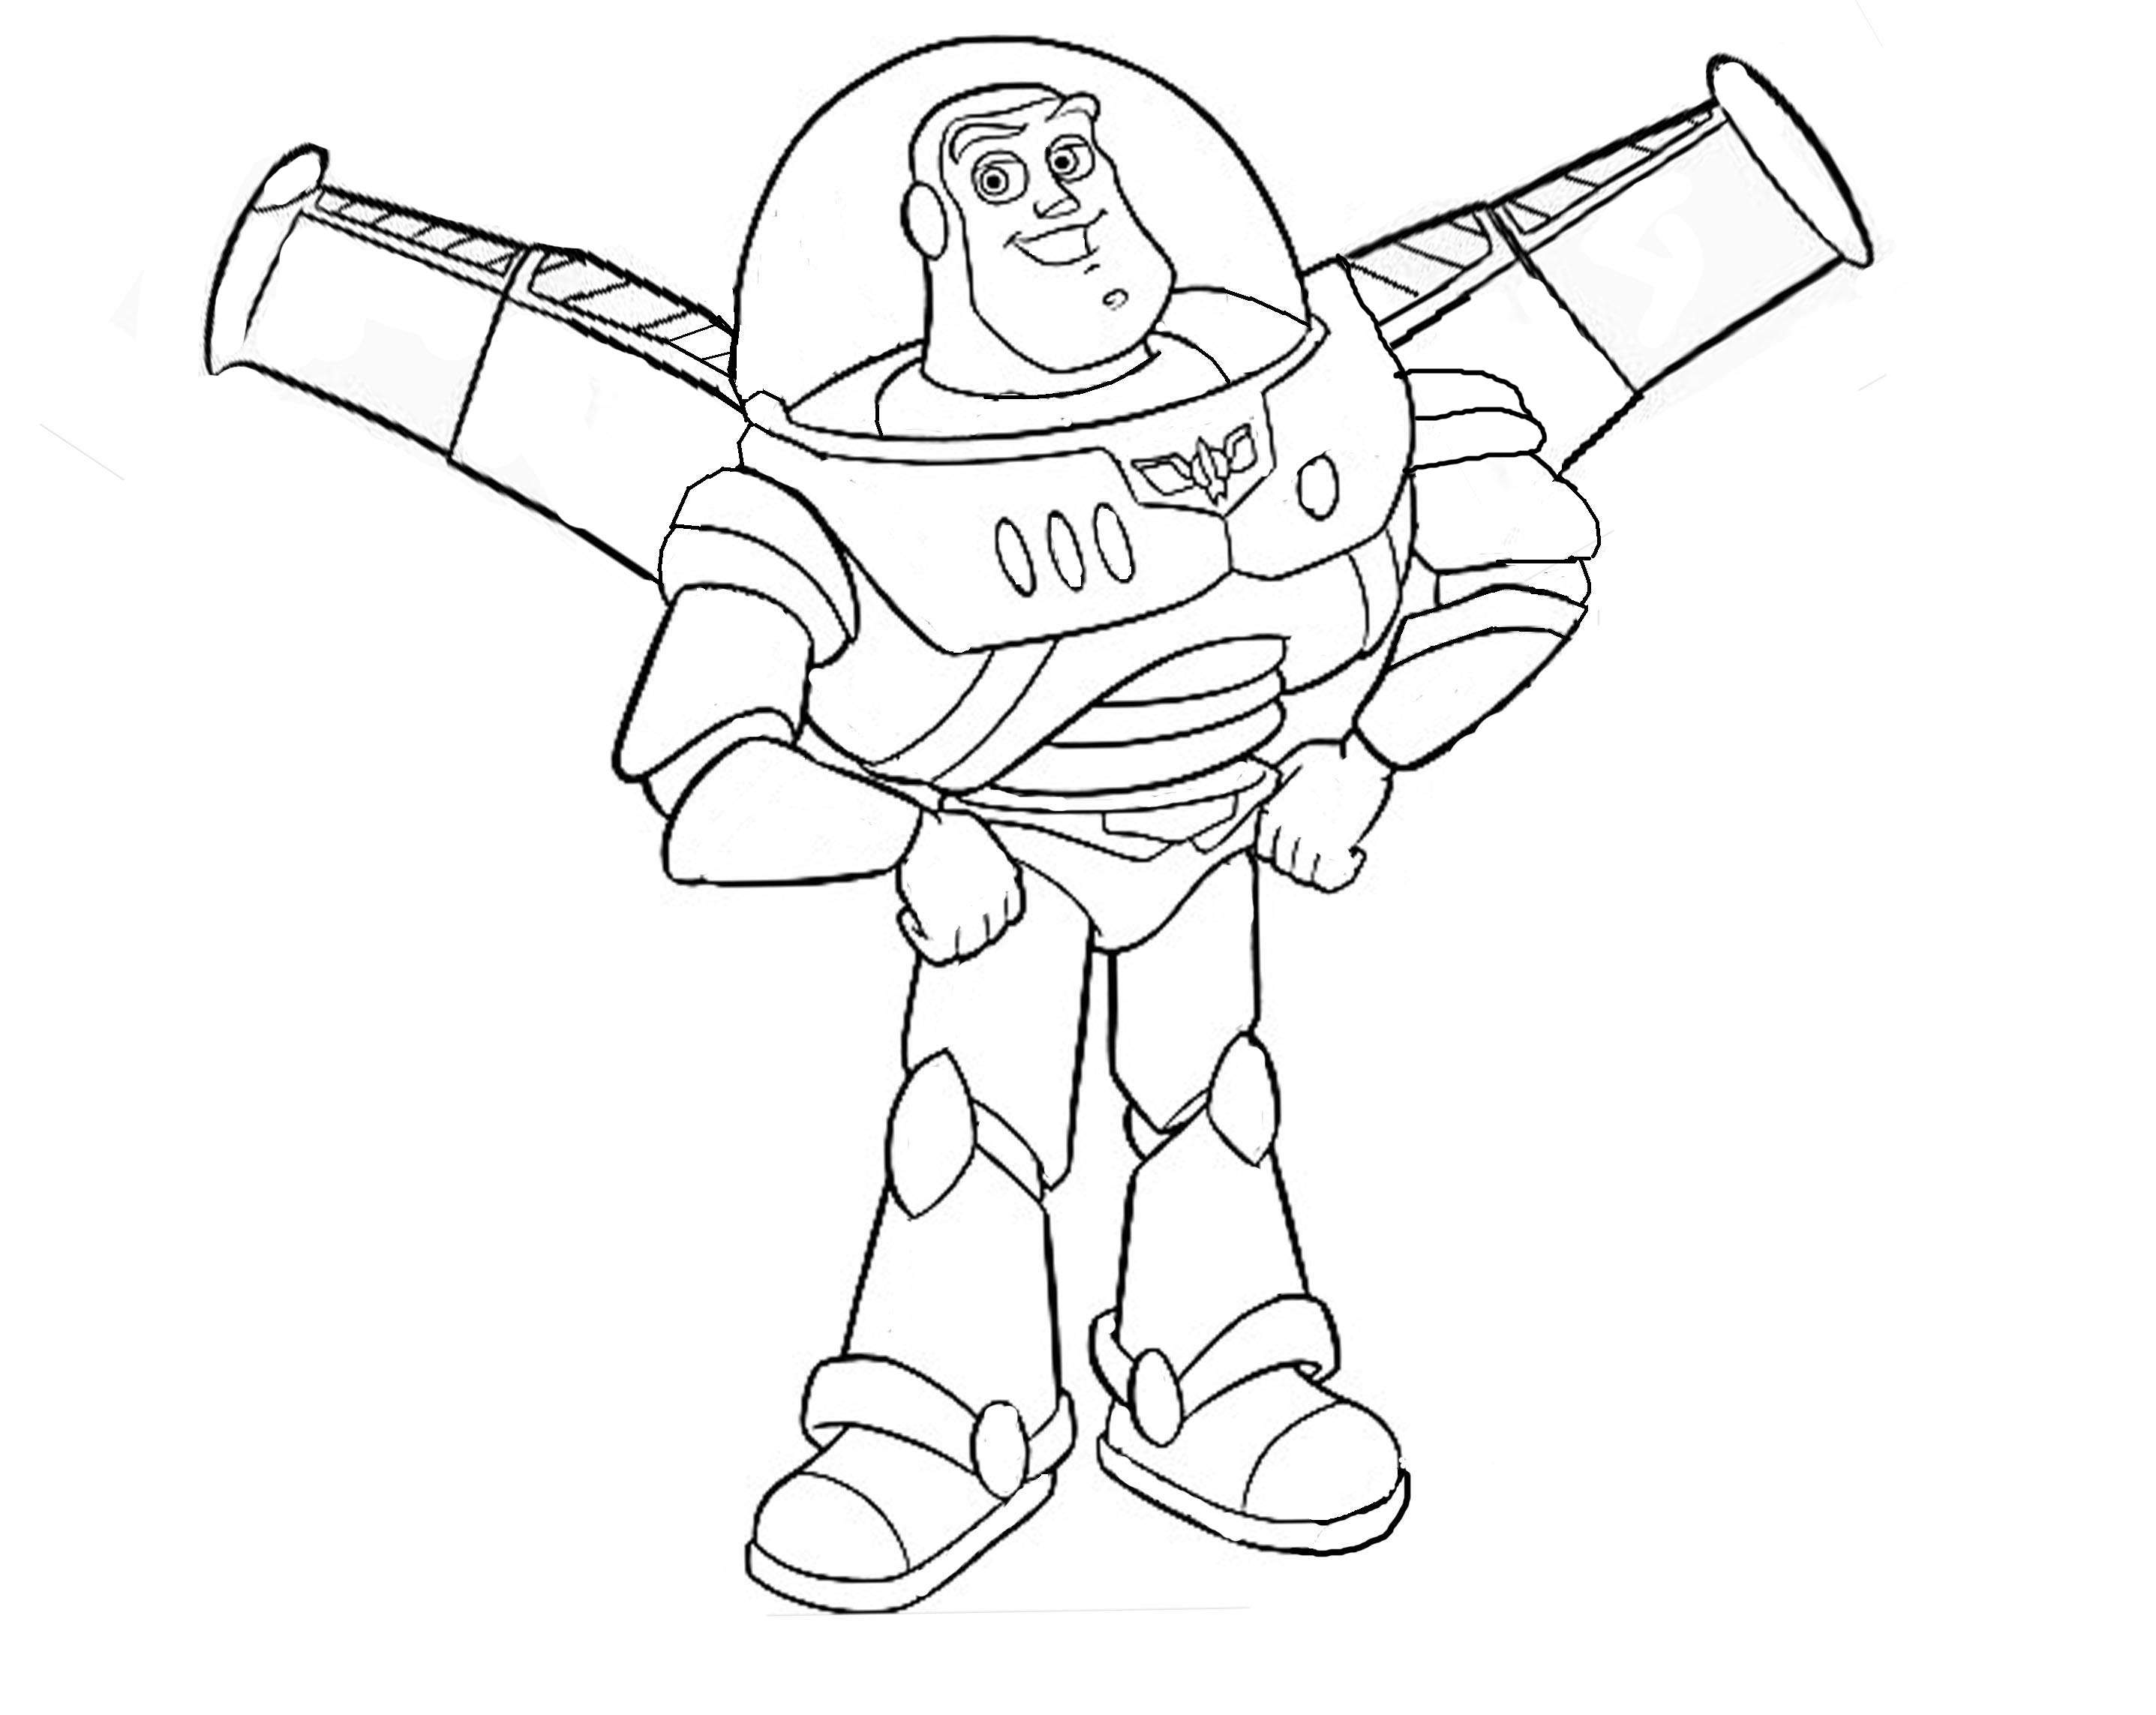 Buzz Lightyear with his wings - Toy Story Kids Coloring Pages - SheetalColor.com